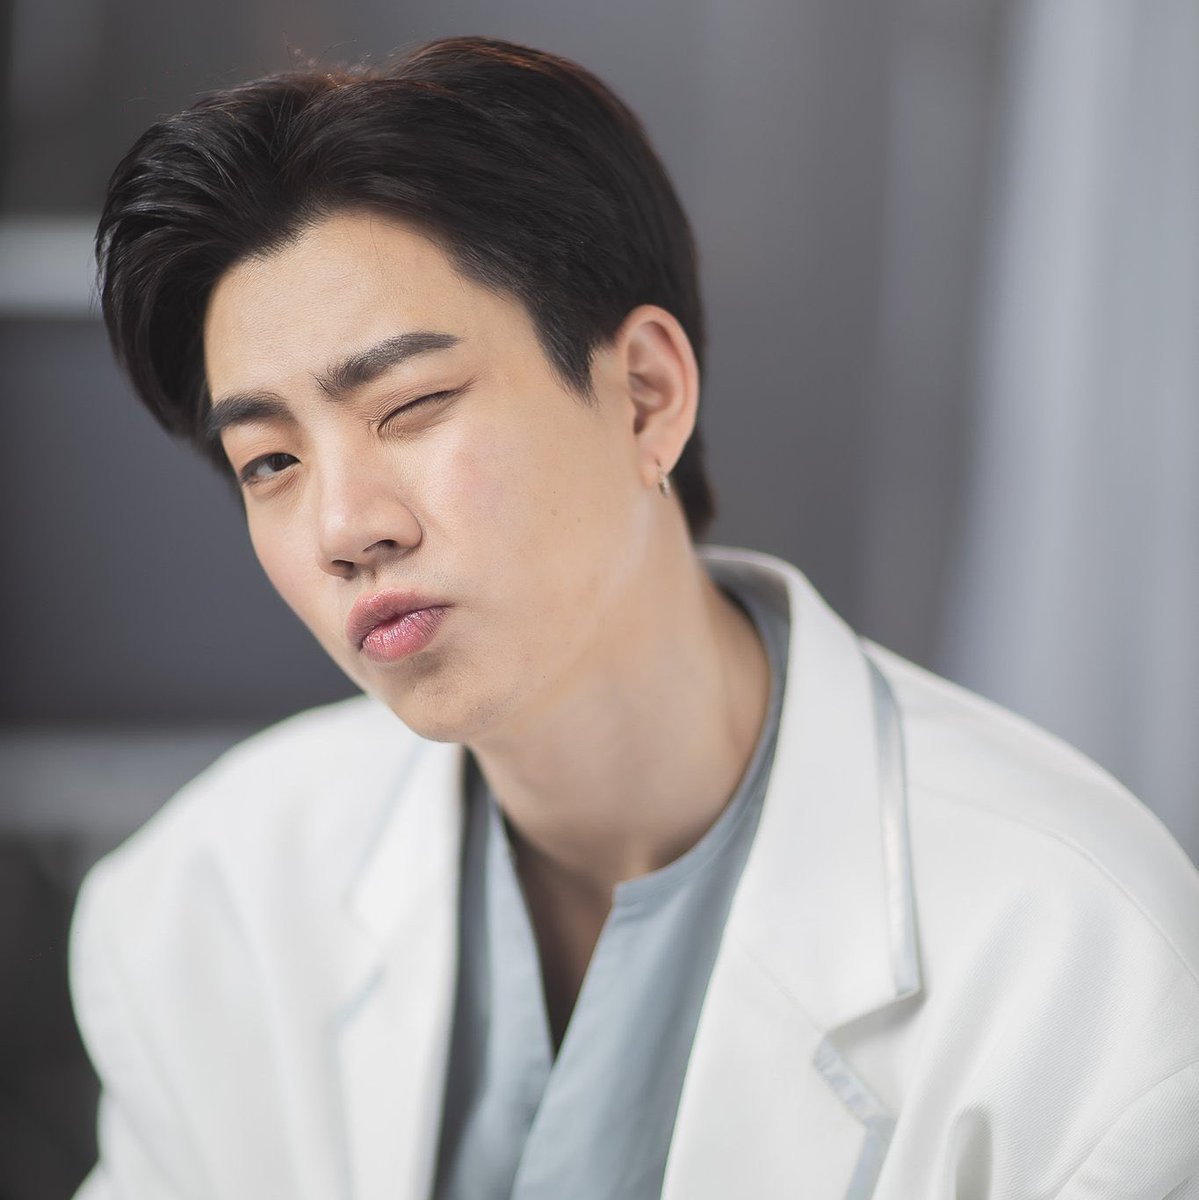 BL Update on Twitter: "GMMTV actor, Off Jumpol was tested positive for  COVID-19 with no symptoms. Let's pray for his fast recovery! 🙏  https://t.co/R5ekg4wl5G" / Twitter